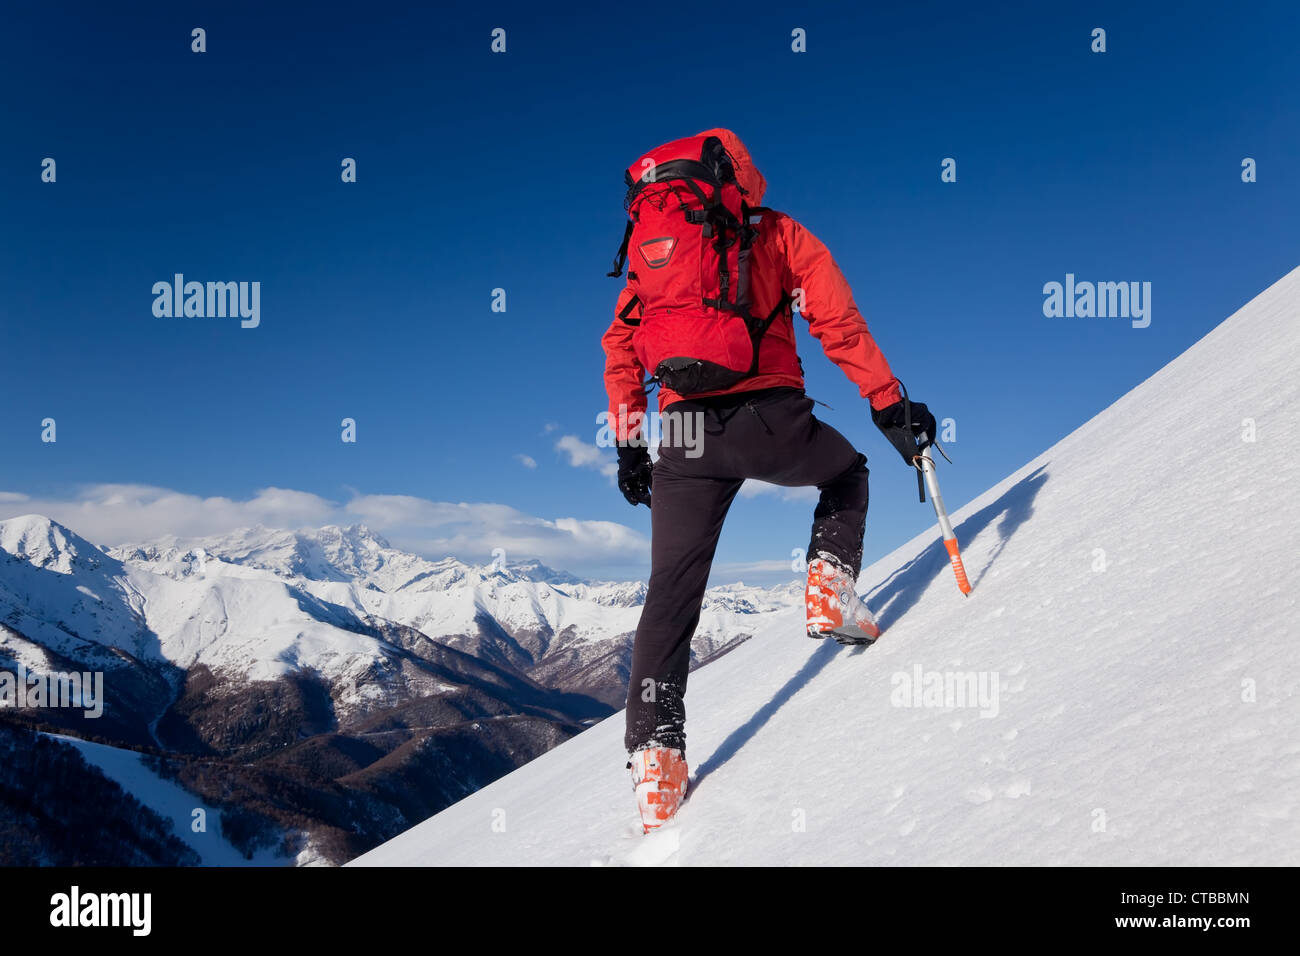 A male climber dressed in red climbs down snowy slope Winter clear sky day In background Monte Rosa massif Italy Europe Stock Photo